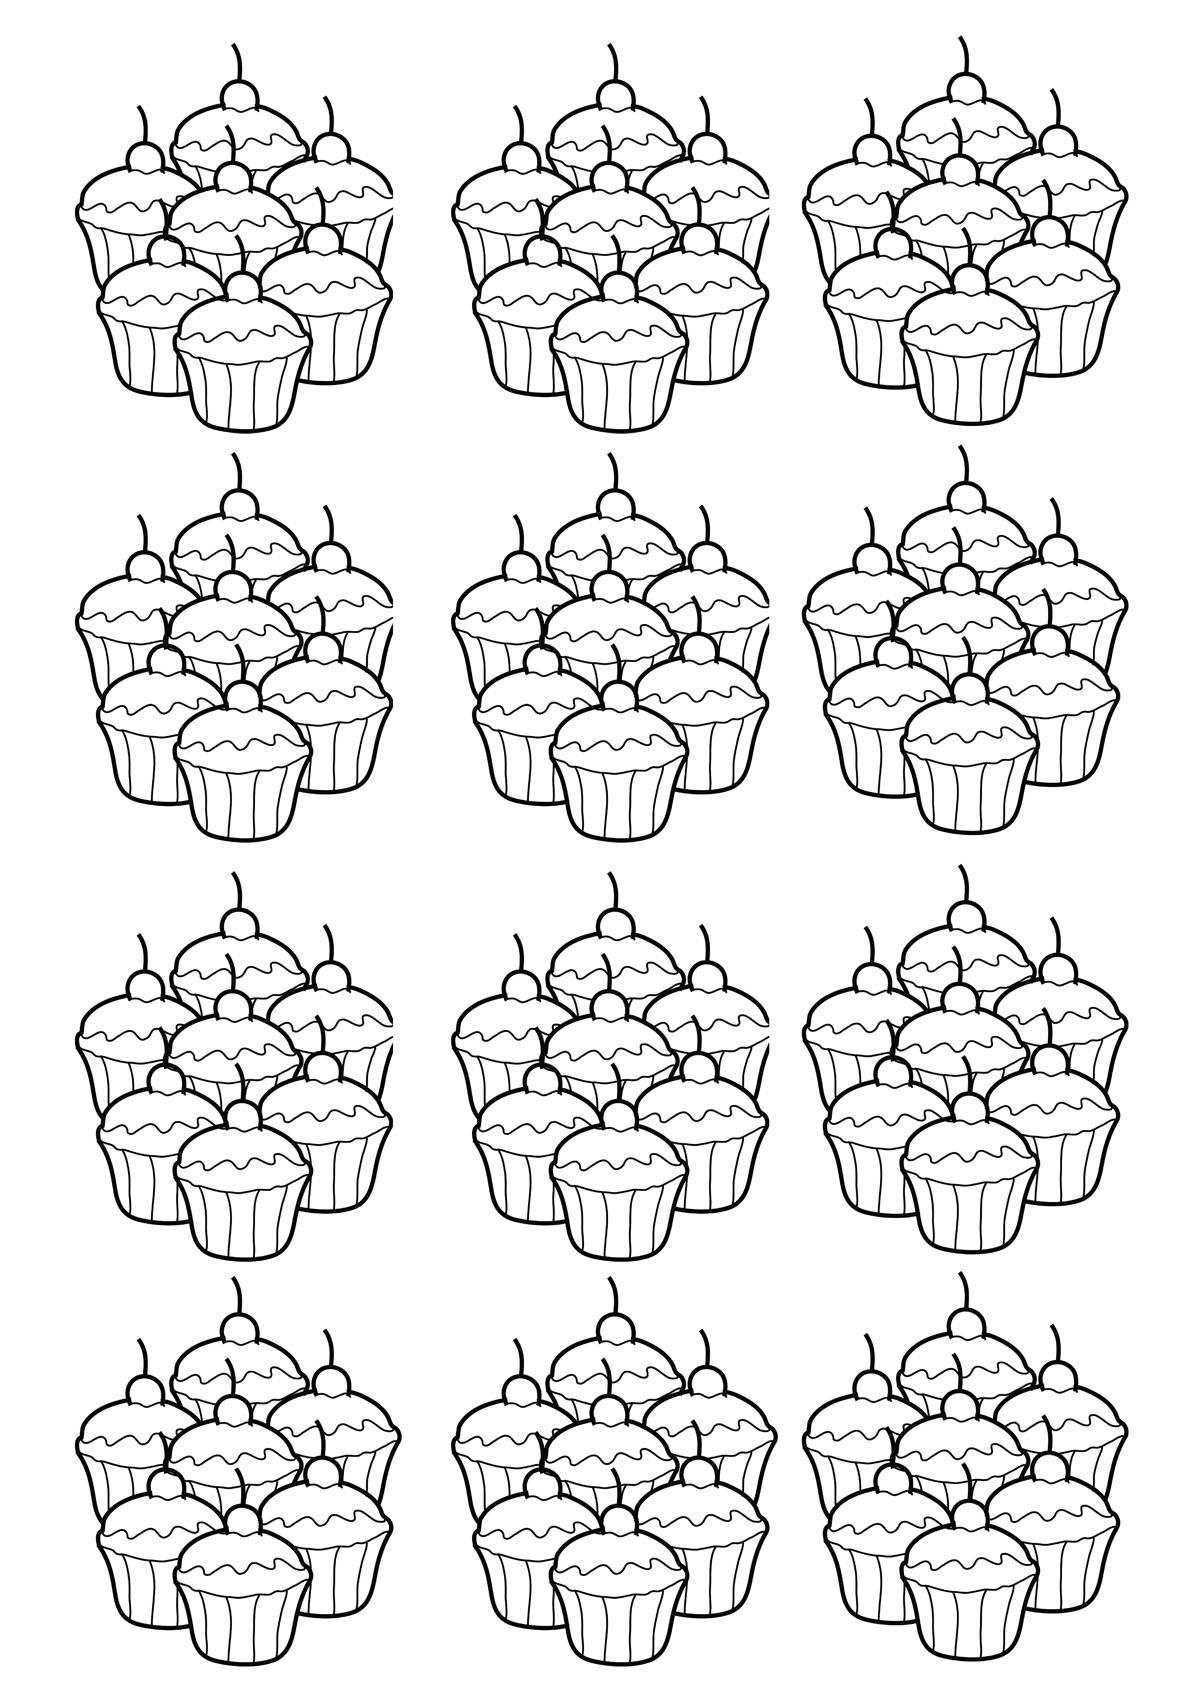 Coloring Adult Cupcakes Mosaique